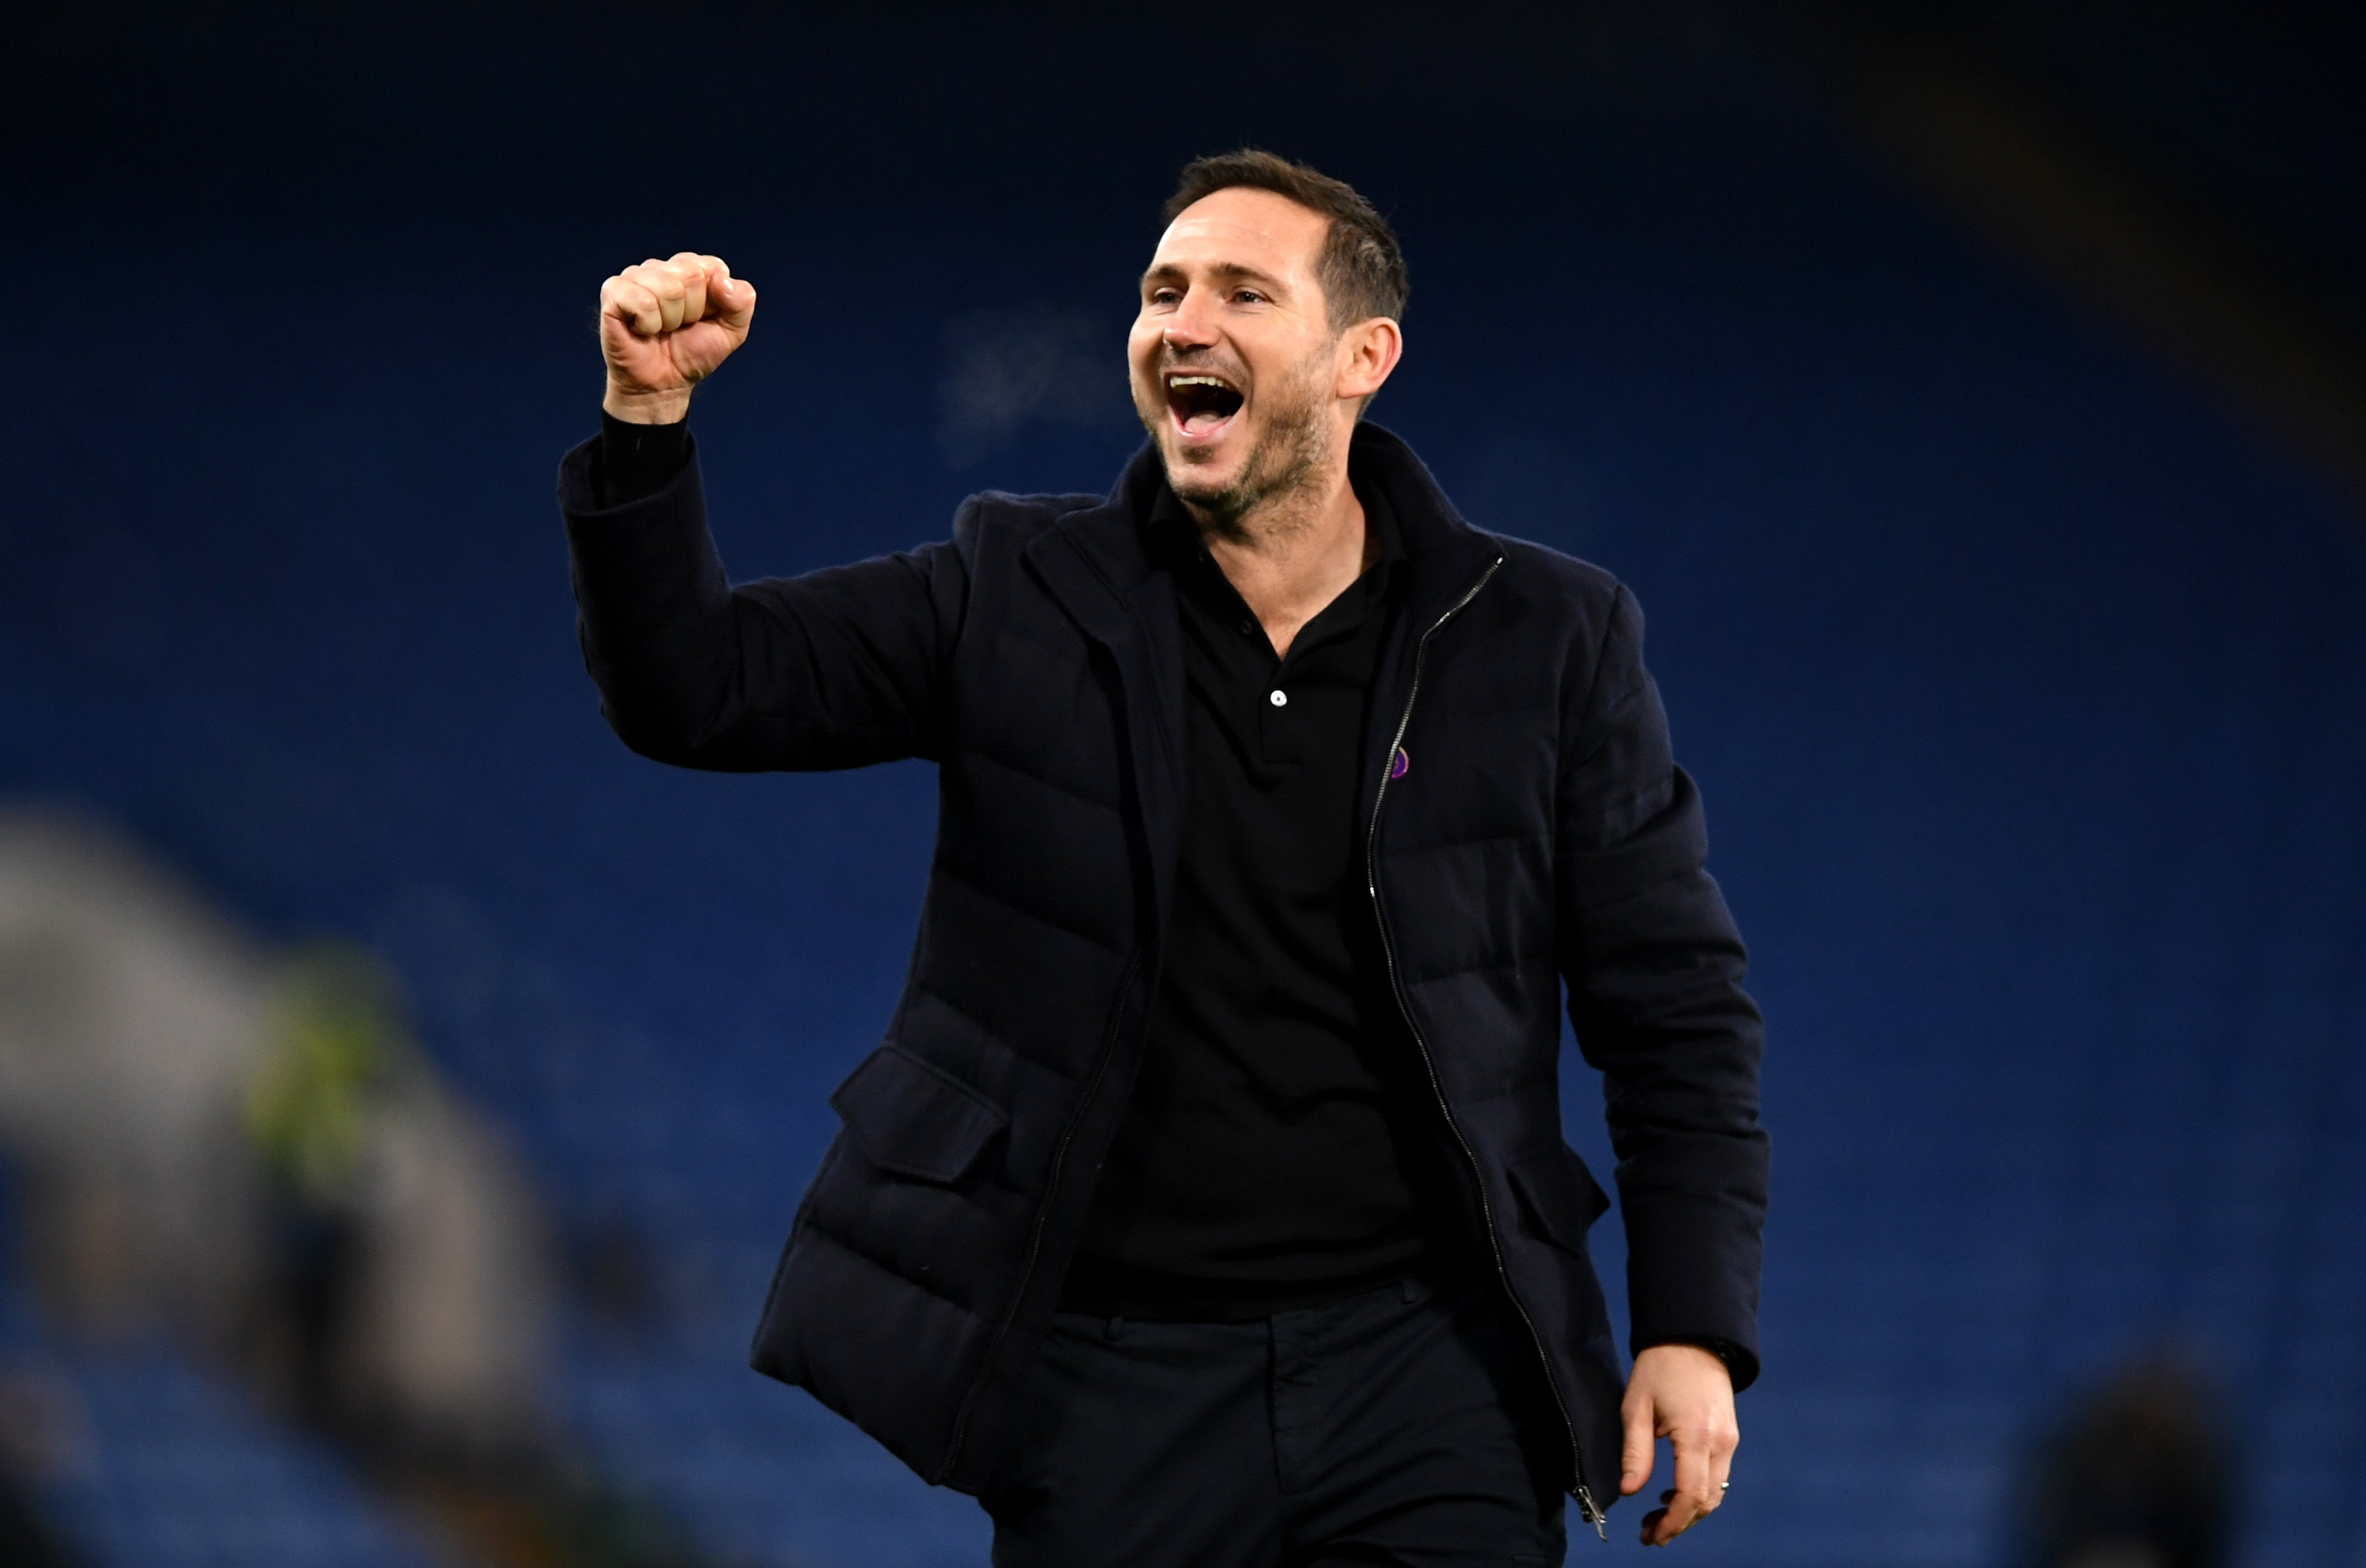 Frank Lampard has emerged as the frontrunner to take charge at Everton